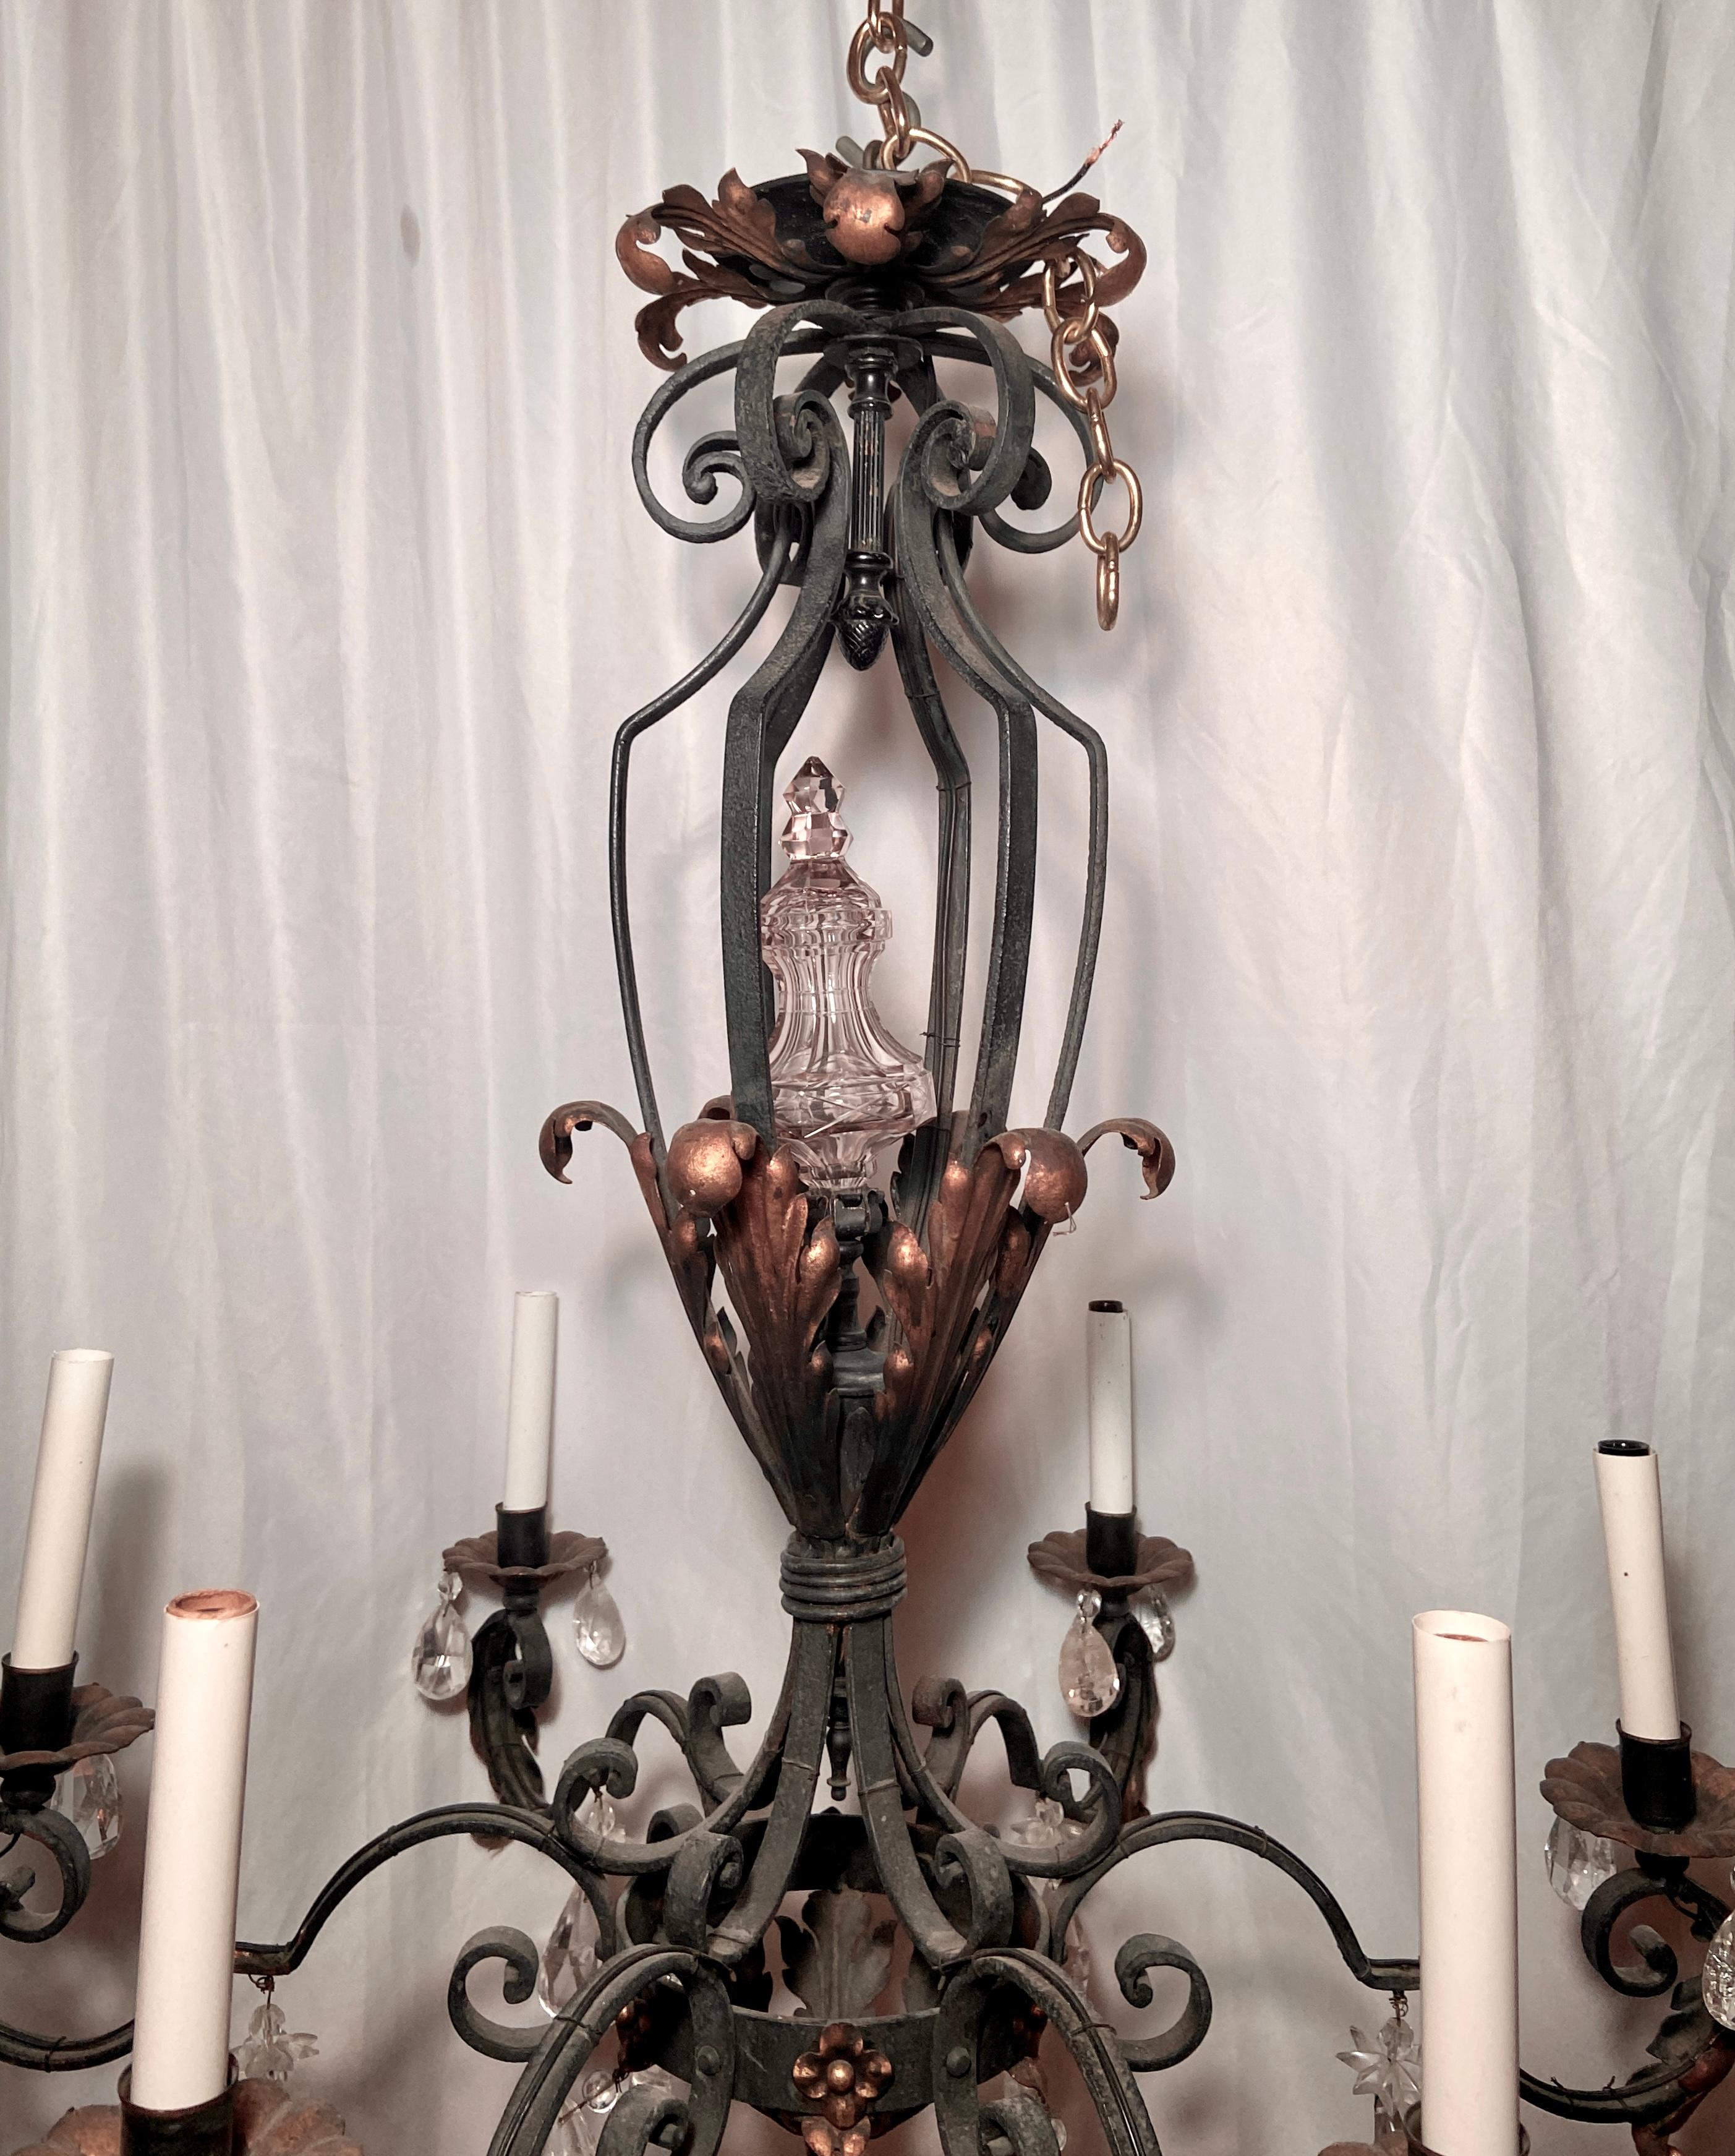 Antique 19th century French provincial iron and crystal chandelier.